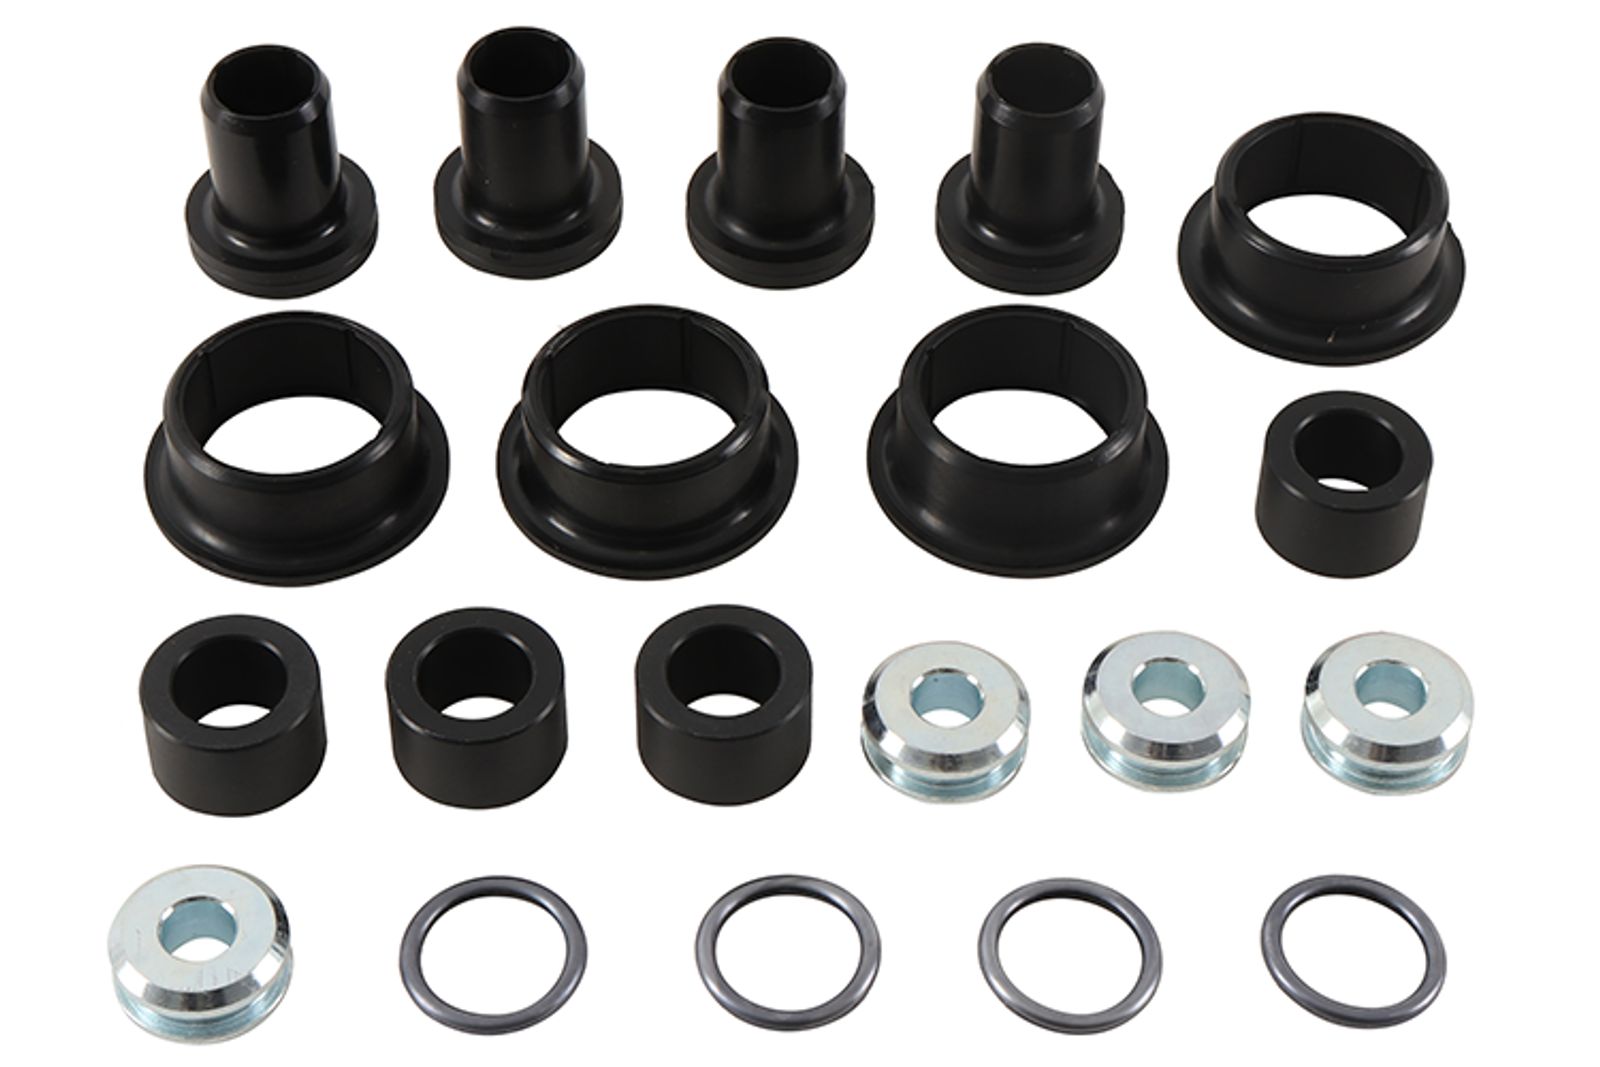 Wrp Rear Ind. Suspension Kits - WRP501204 image